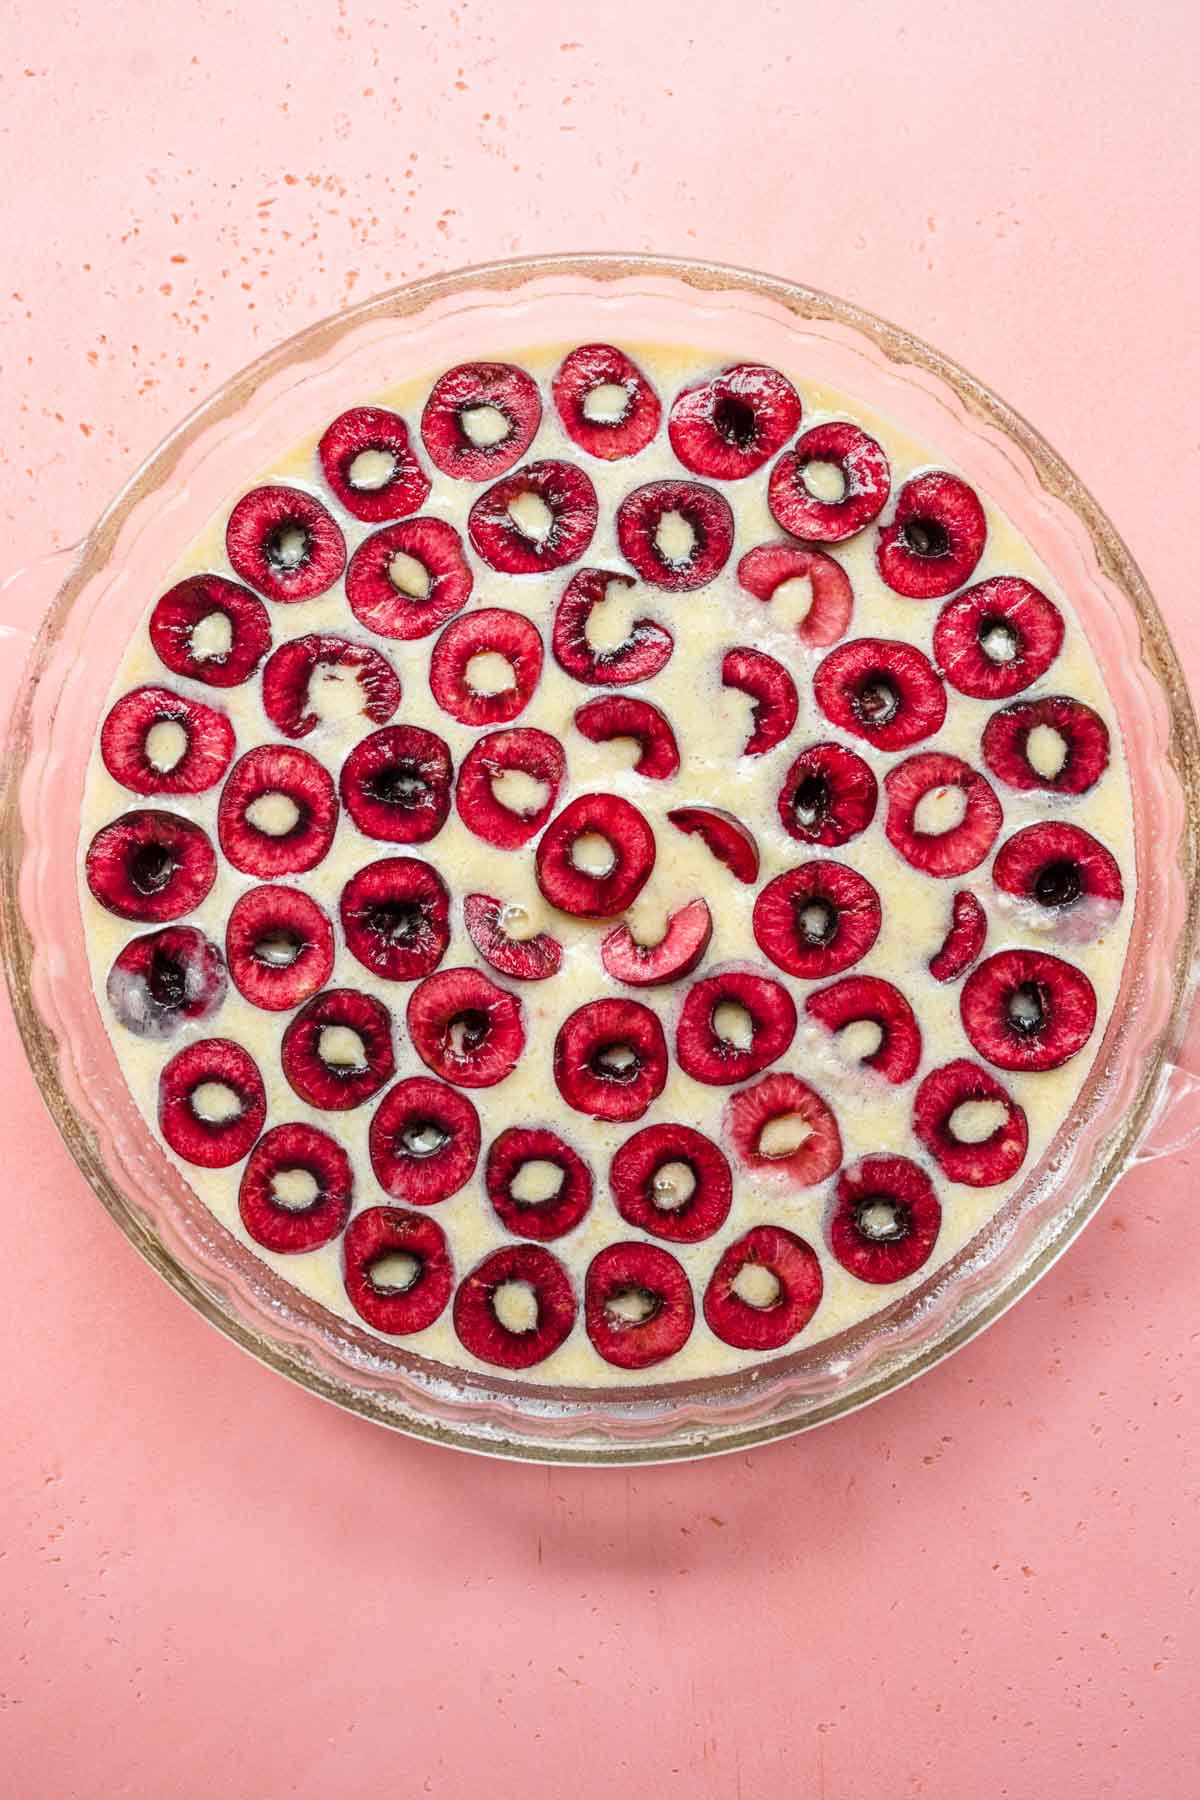 Cherry Clafoutis batter and cherries in glass pie dish before baking, pink background